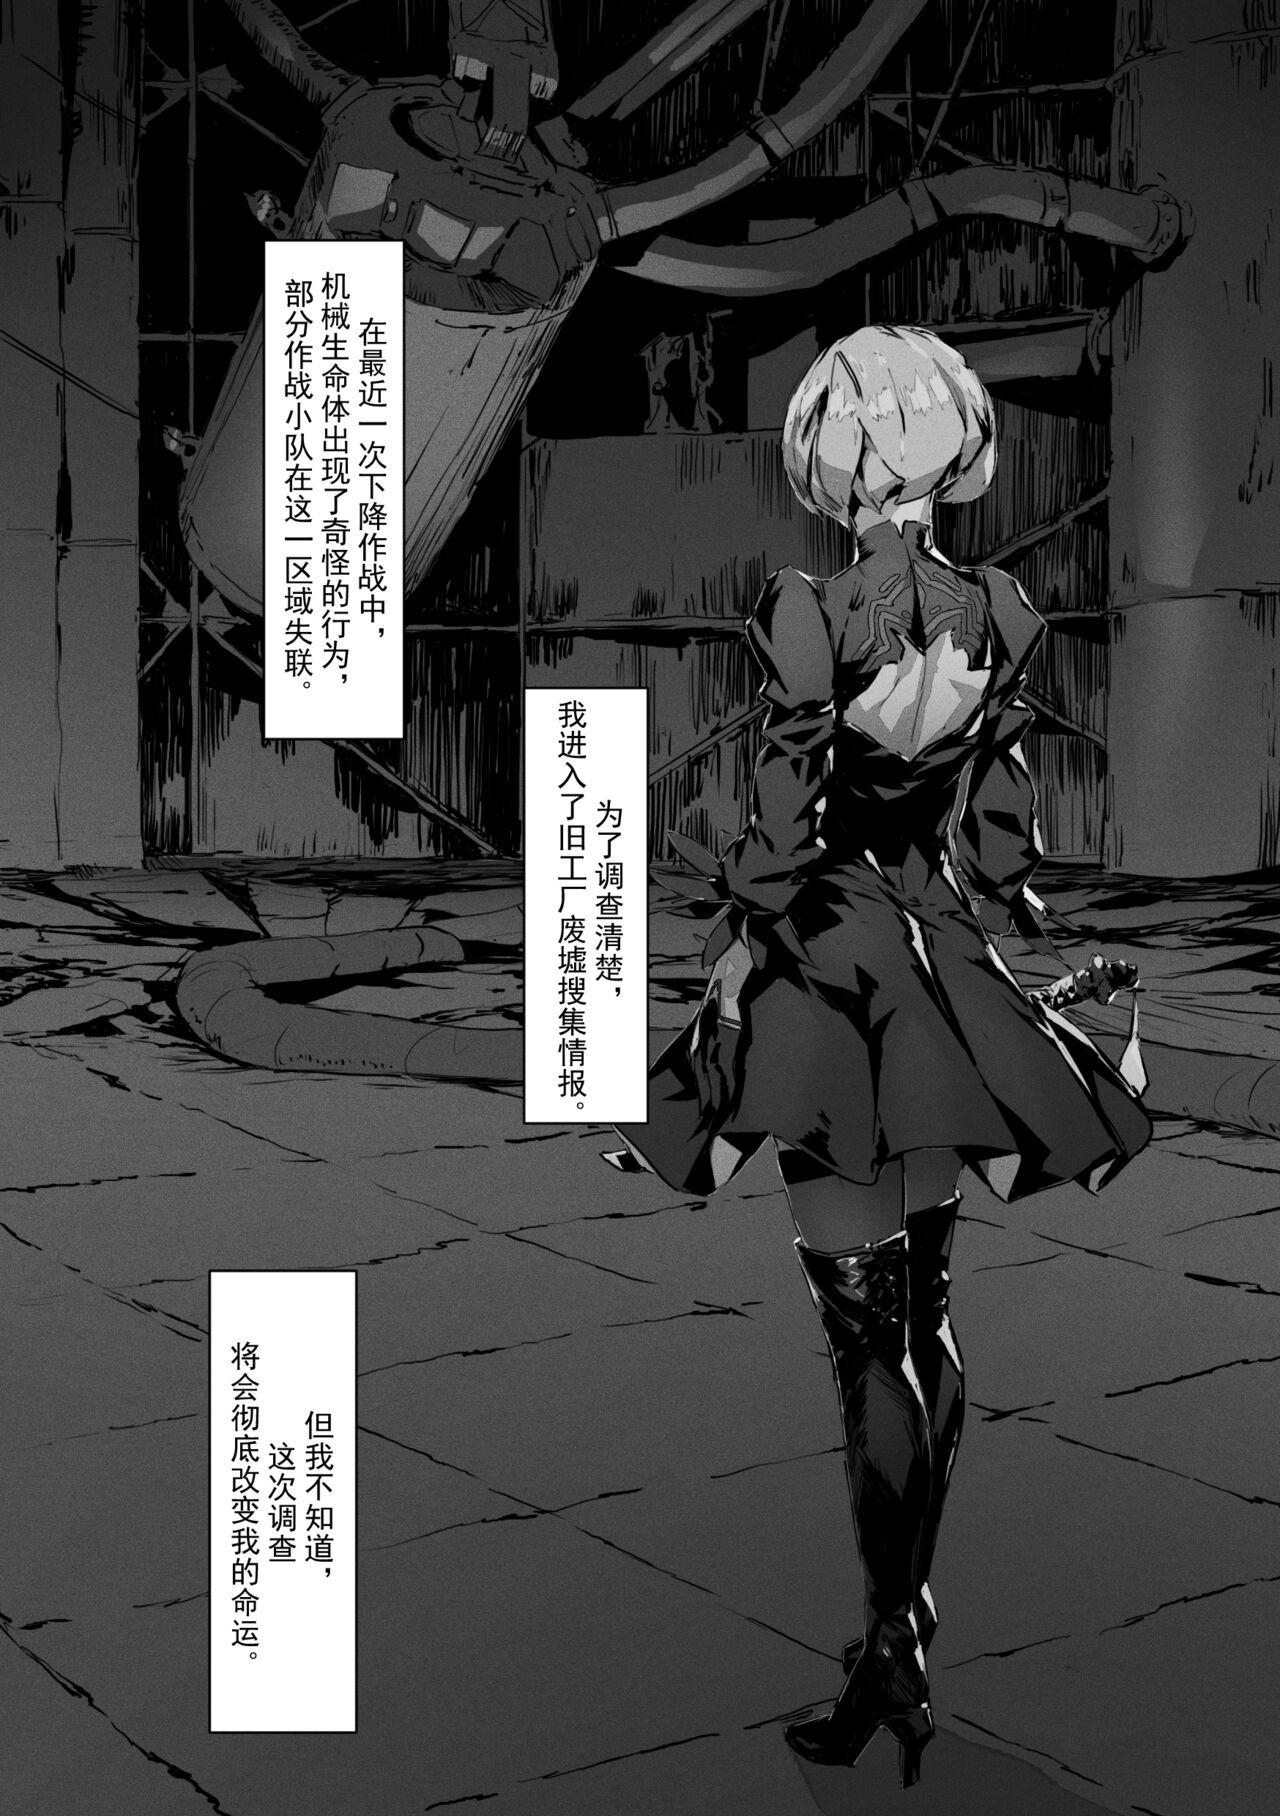  2B In Trouble Part 1-6 - Nier automata Real Amature Porn - Page 1